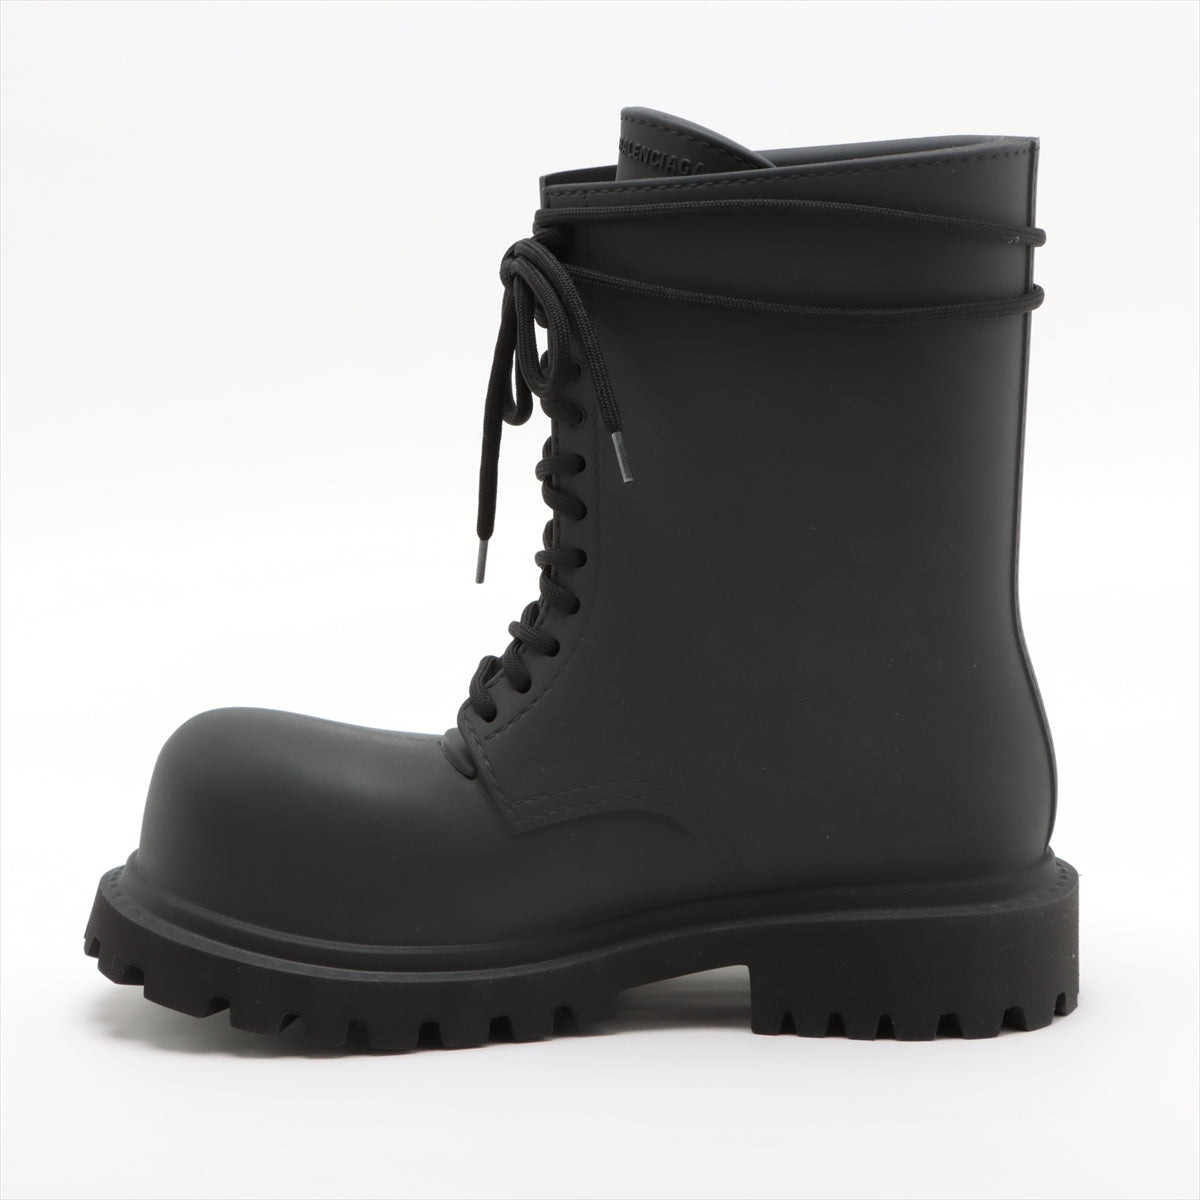 Balenciaga Rubber Boots EU40 Men's Grey 717807 steroid boots There is a bag